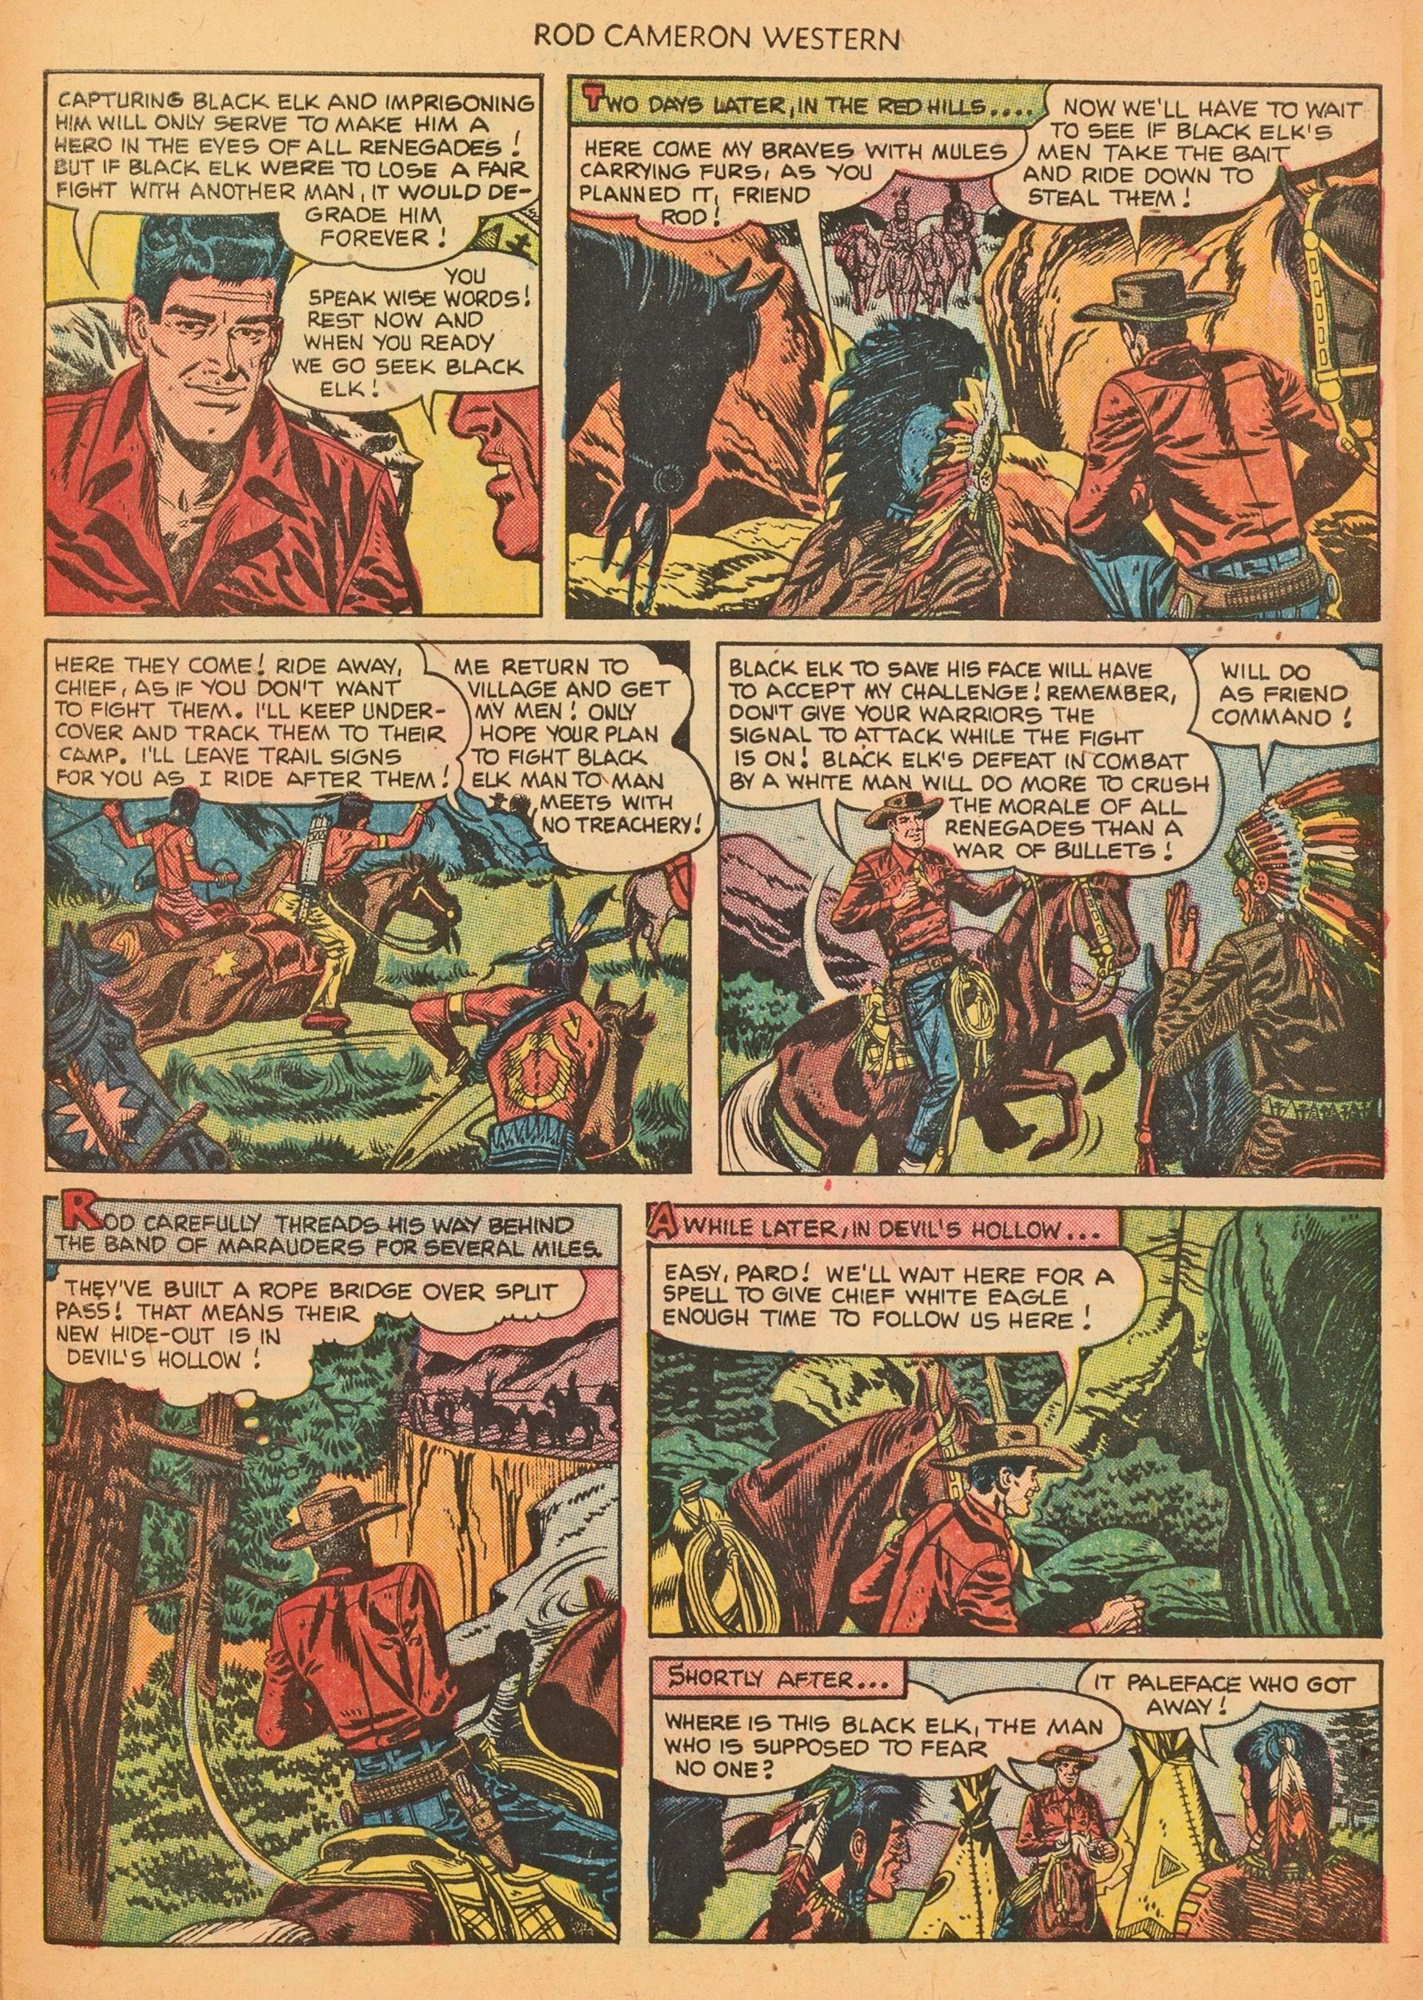 Read online Rod Cameron Western comic -  Issue #15 - 31